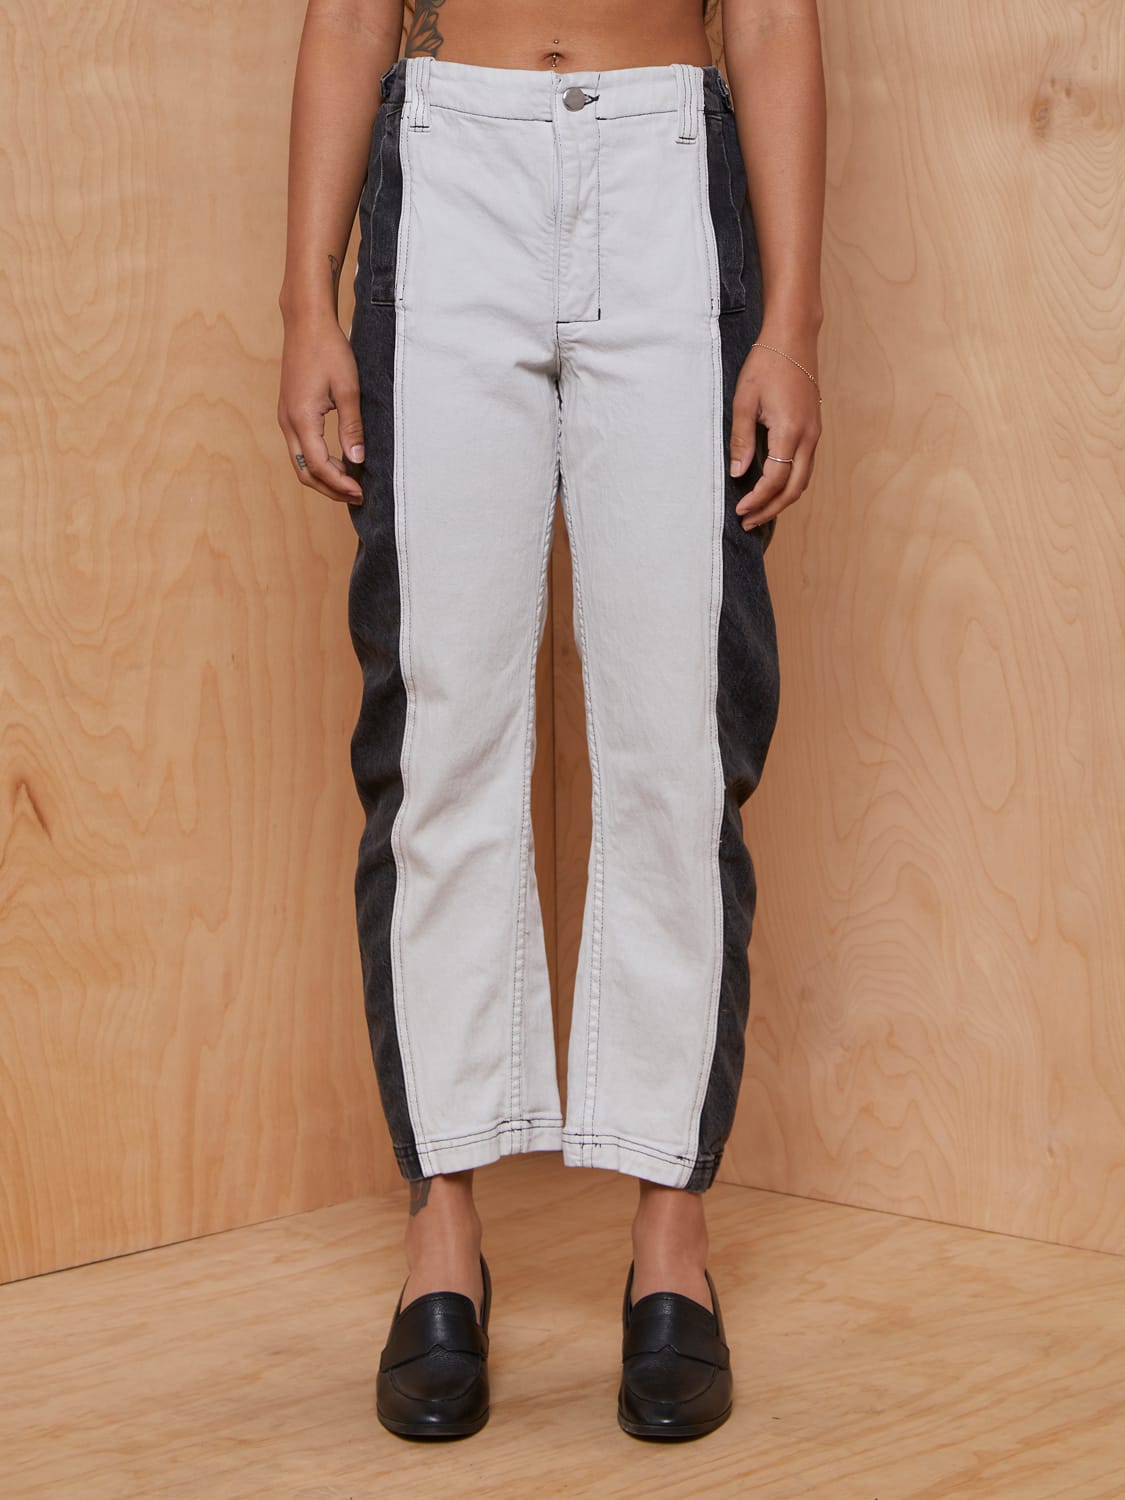 Rachel Comey Two Tone Jeans with Adjustable Waistband